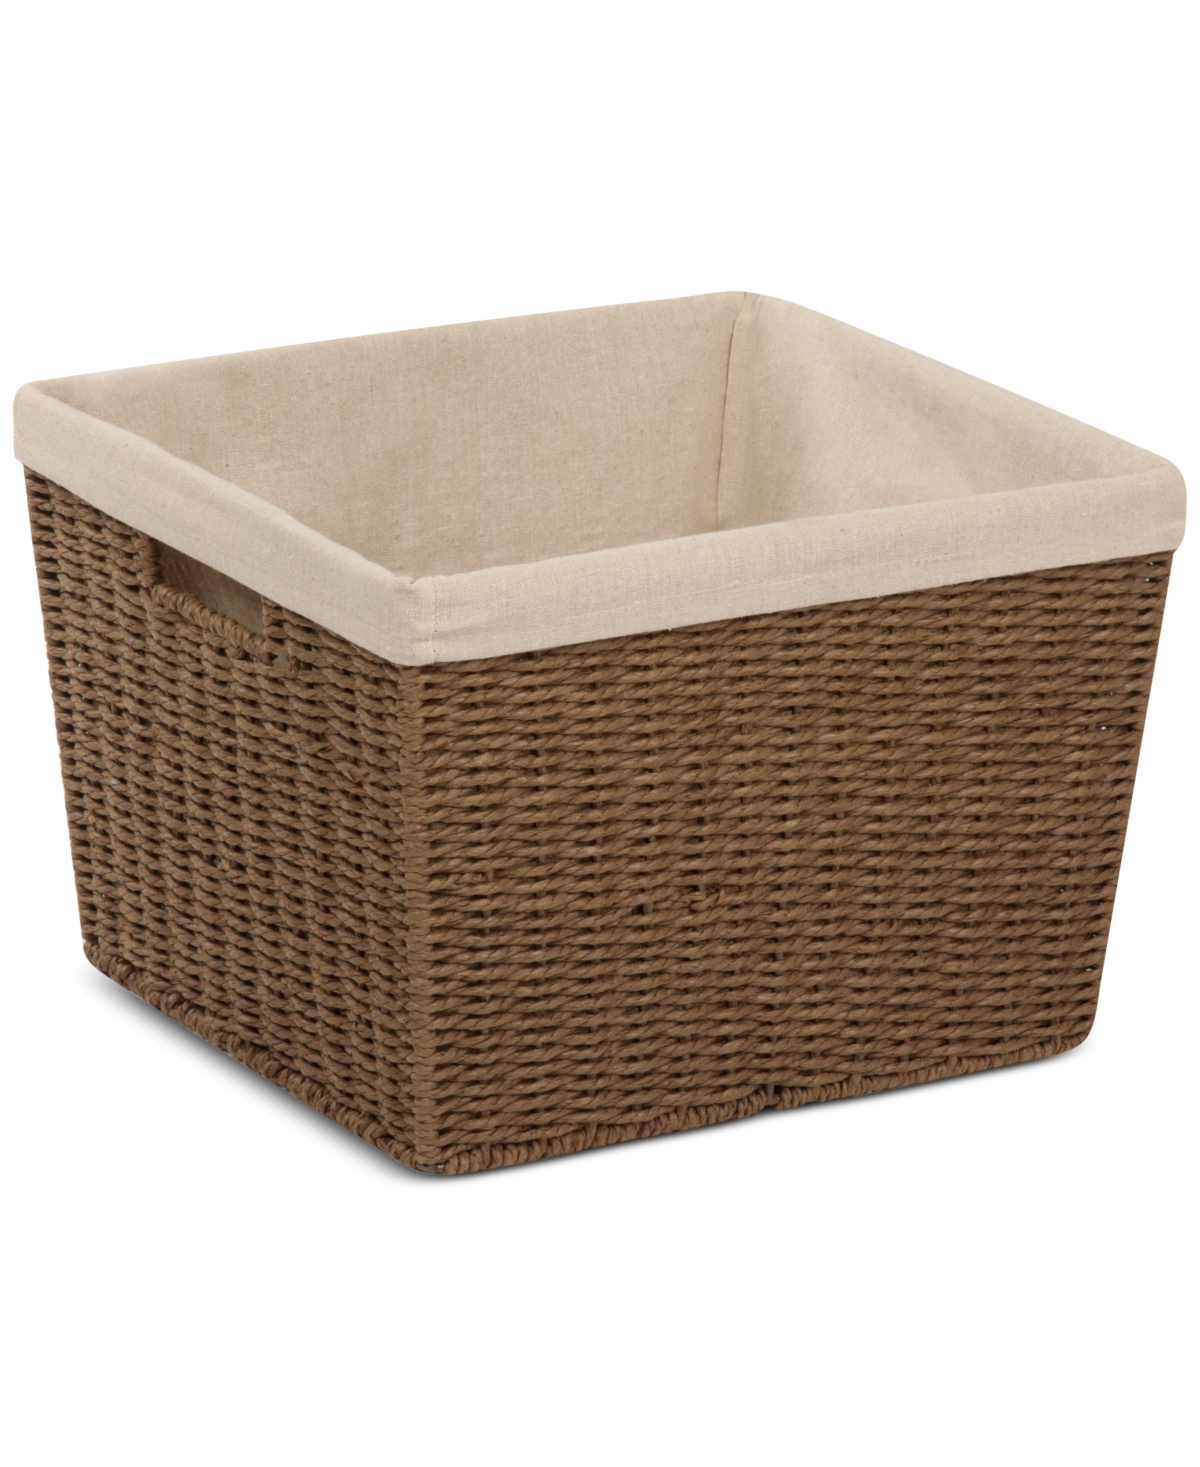 Honey-Can-Do Parchment Cord Basket with Liner - Brown